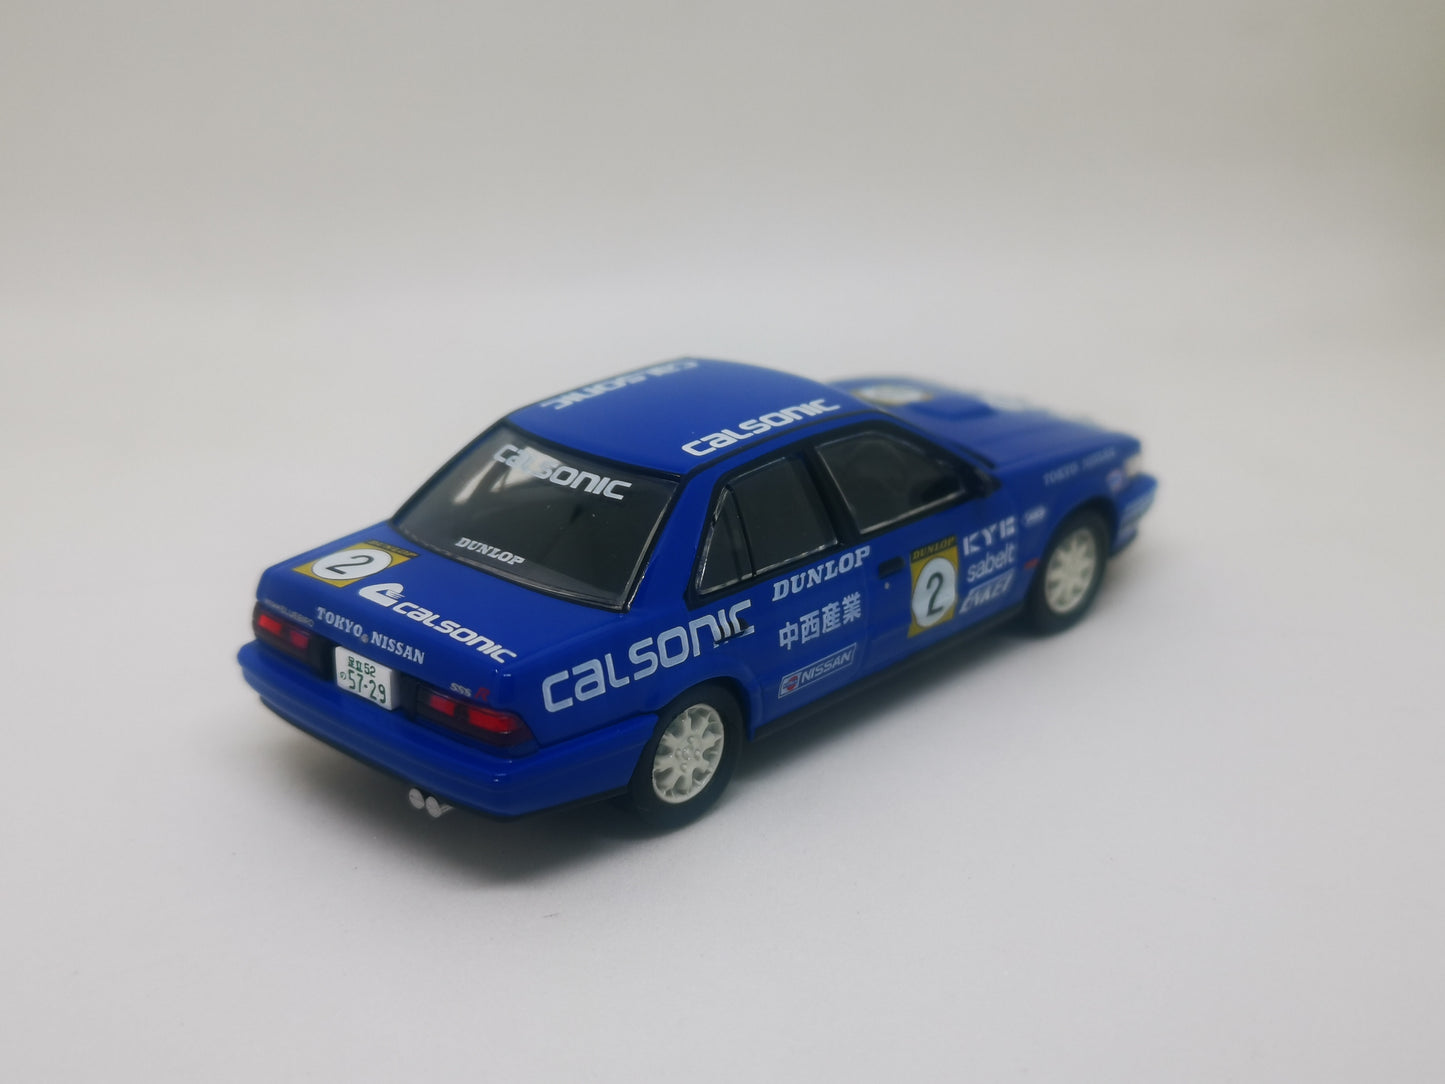 Tomica Limited Vintage Neo Nissan Blue Bird SSS R Calsonic #2